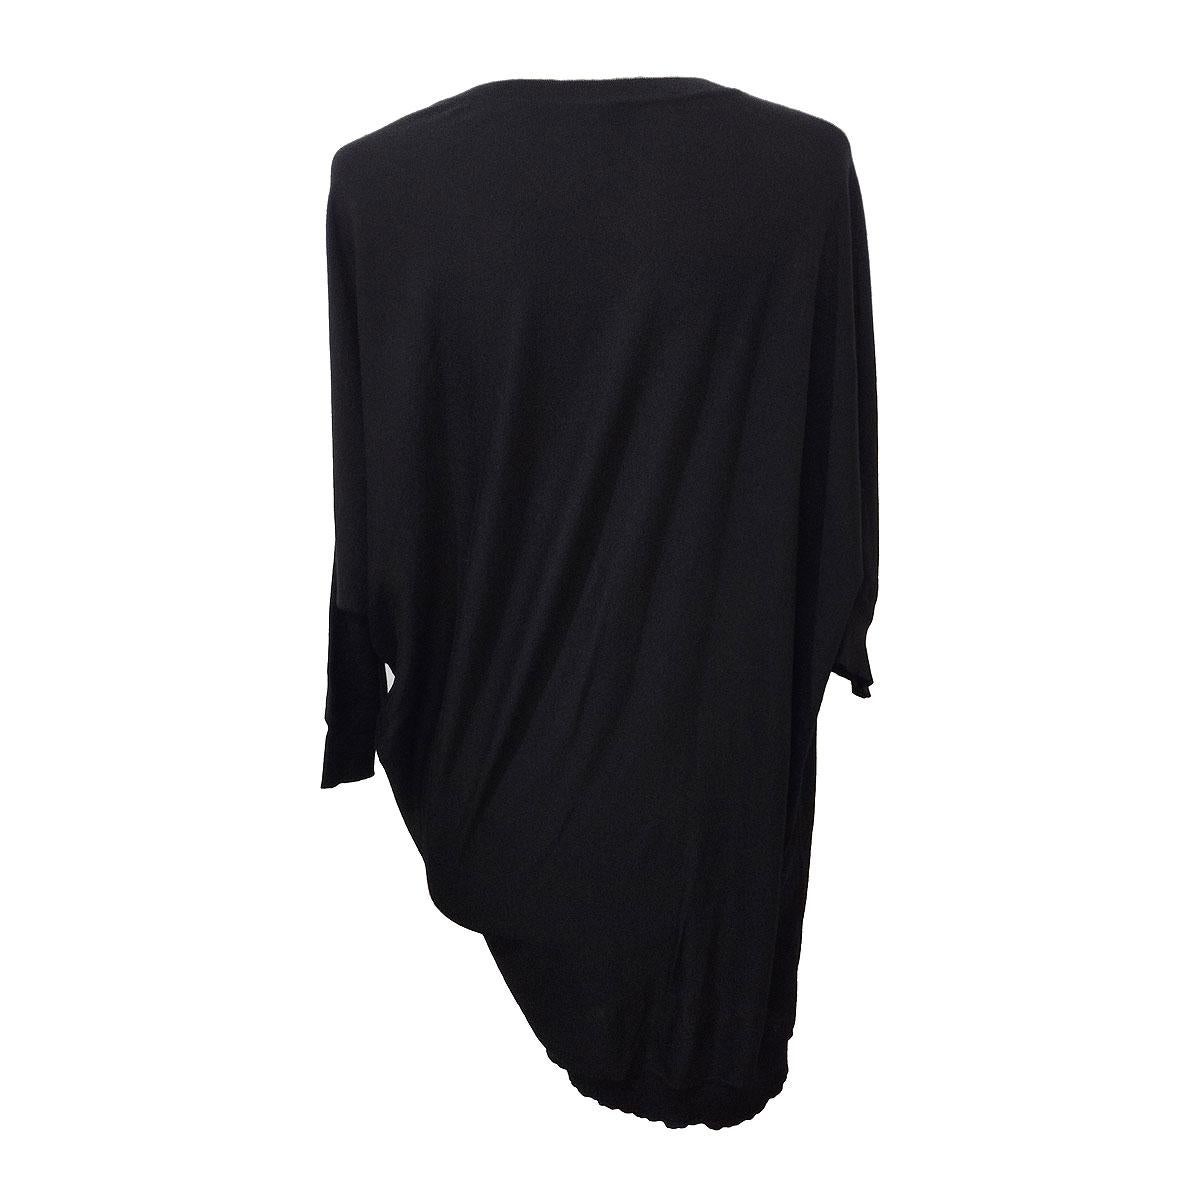 100% Wool
Black color
3/4 Sleeve
Maximum length cm 75 (29,5 inches)
Fast international shipping from Italy included in the price